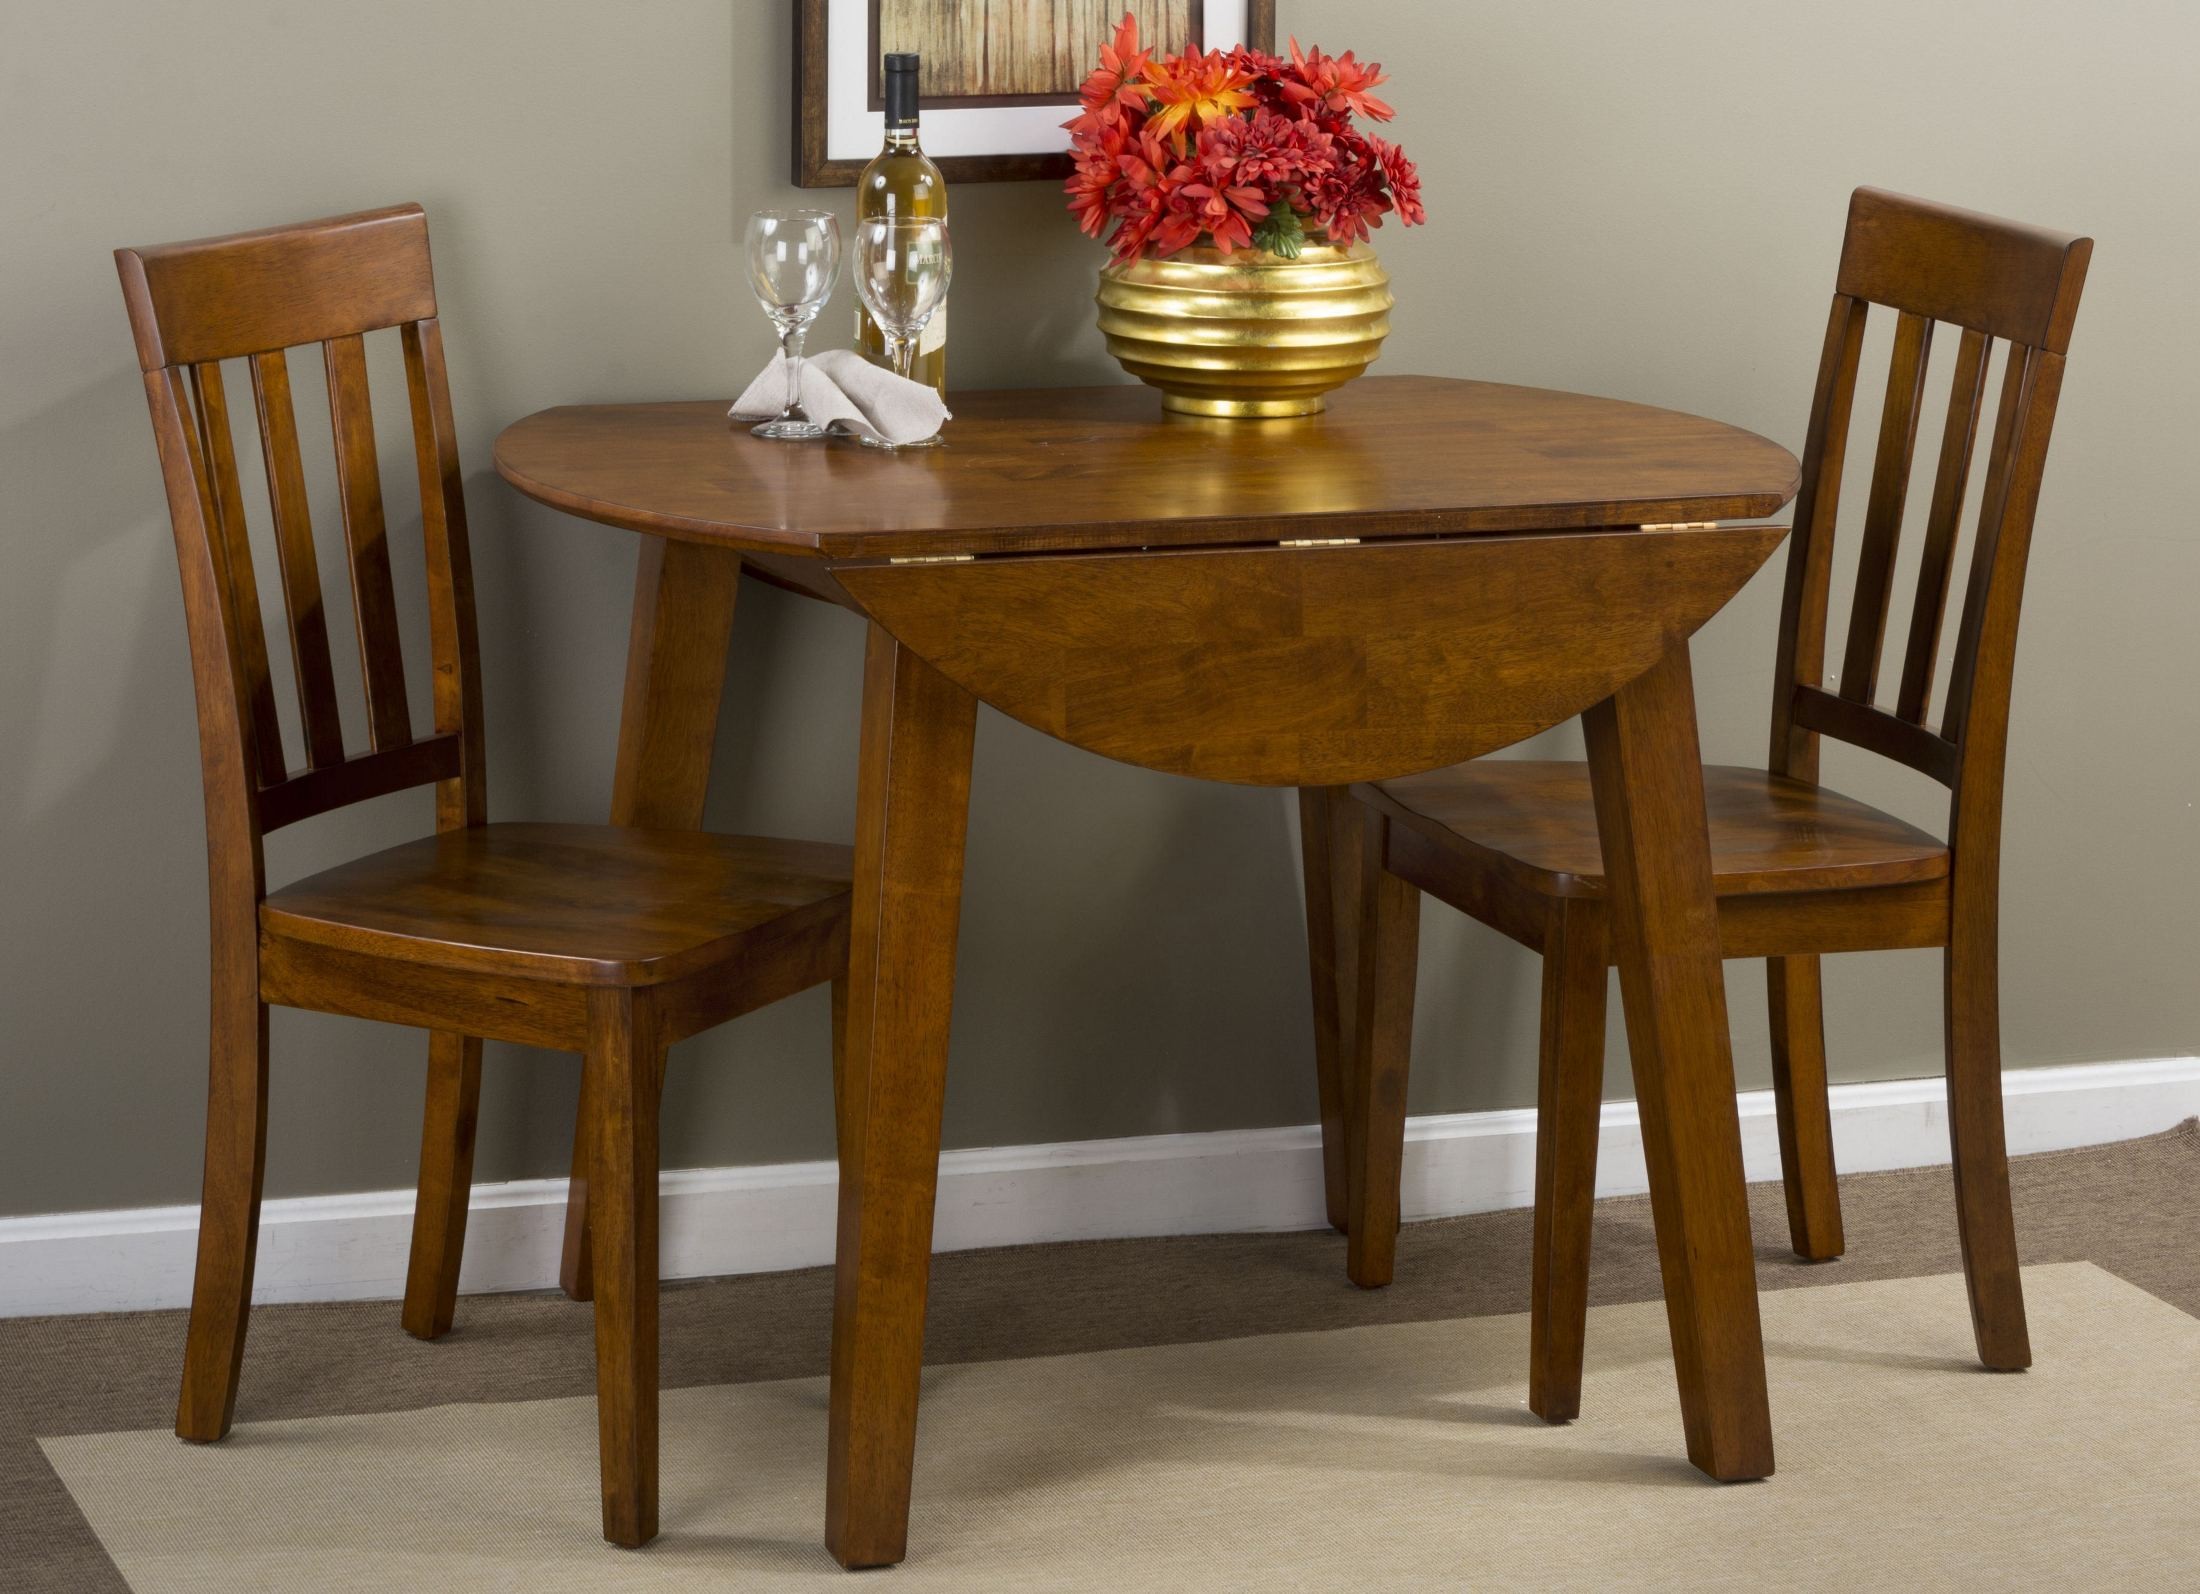 Drop Leaf Round Dining Room Table Real Wood